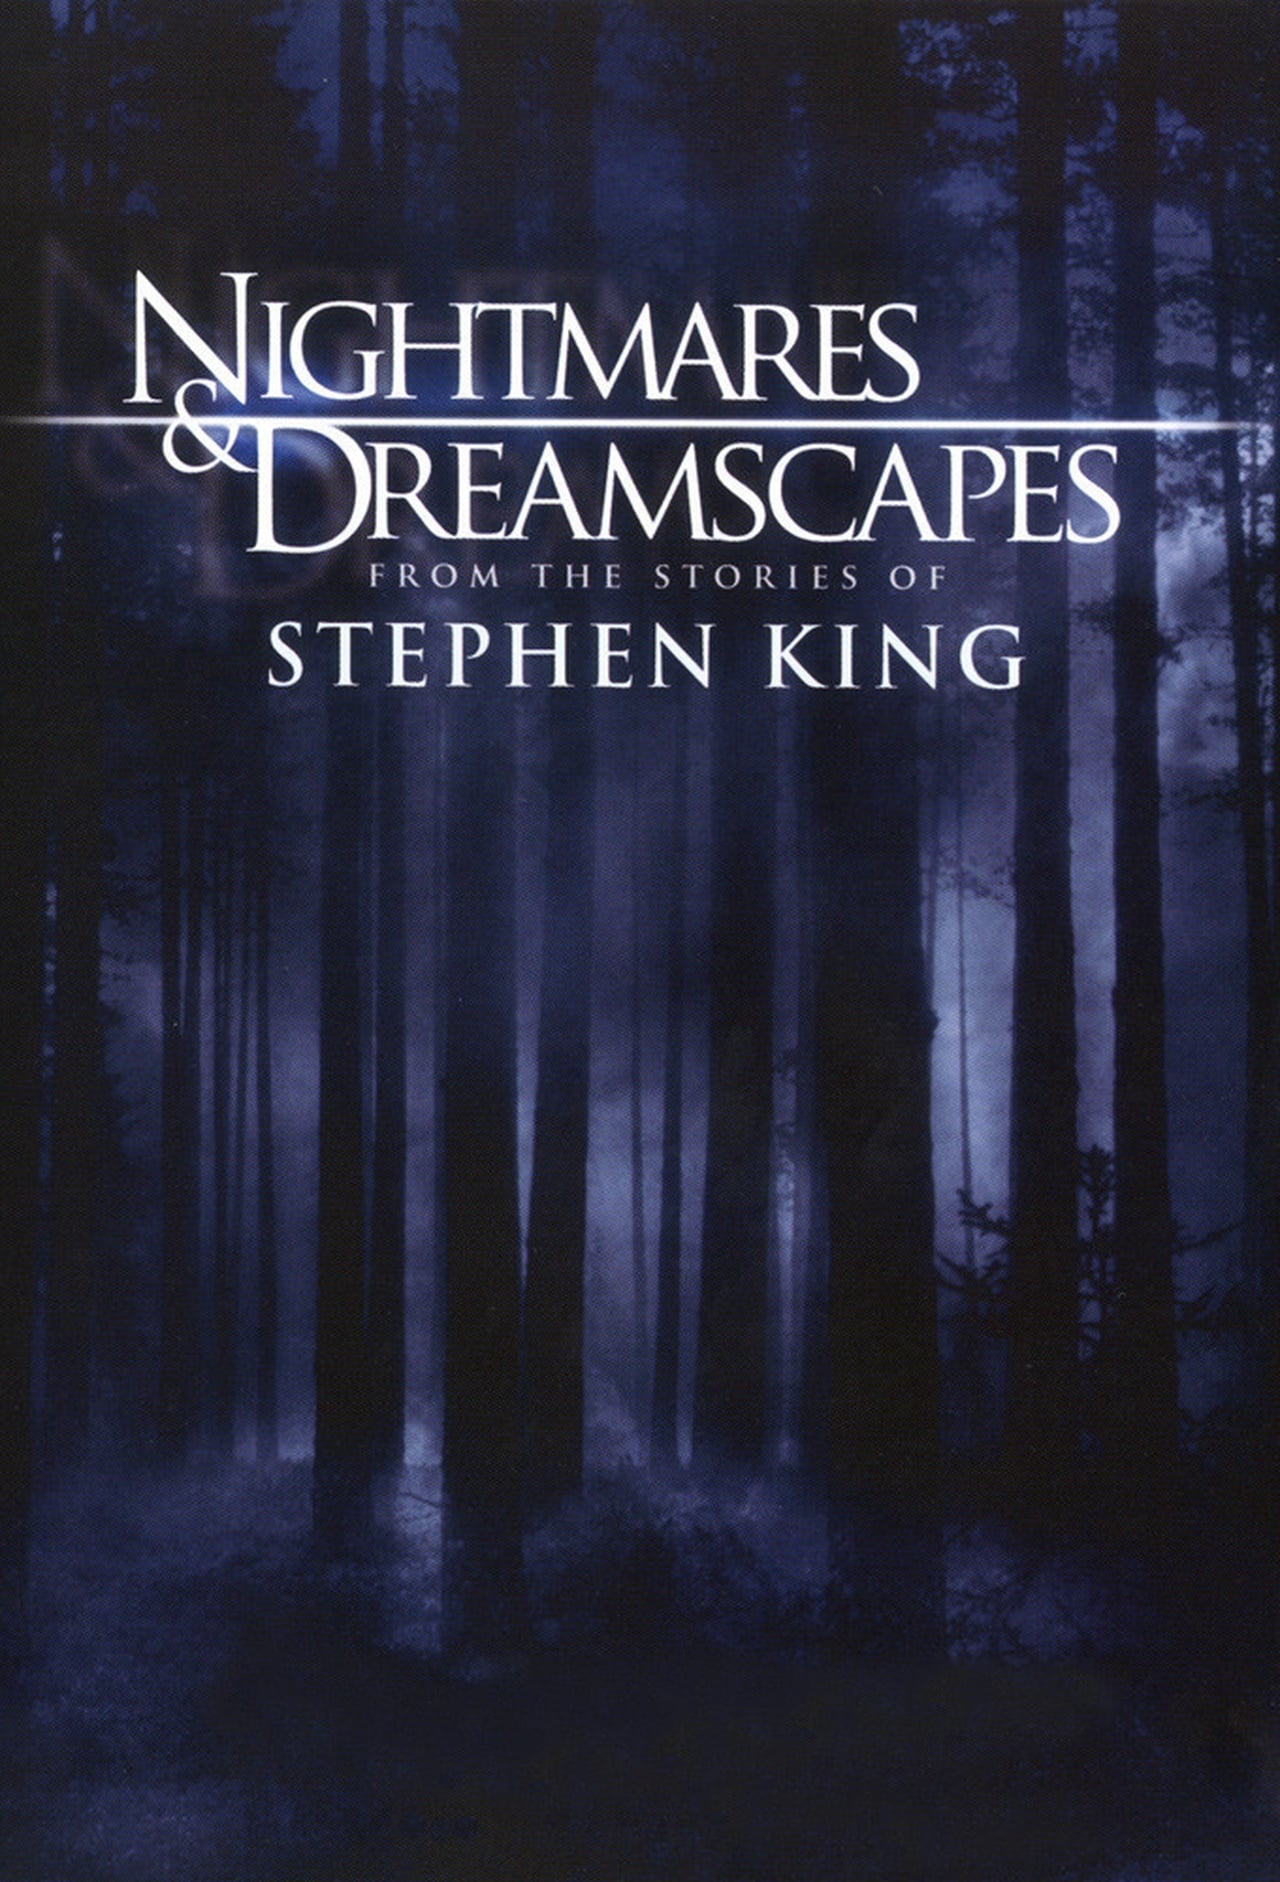 Nightmares & Dreamscapes: From The Stories Of Stephen King Season 1